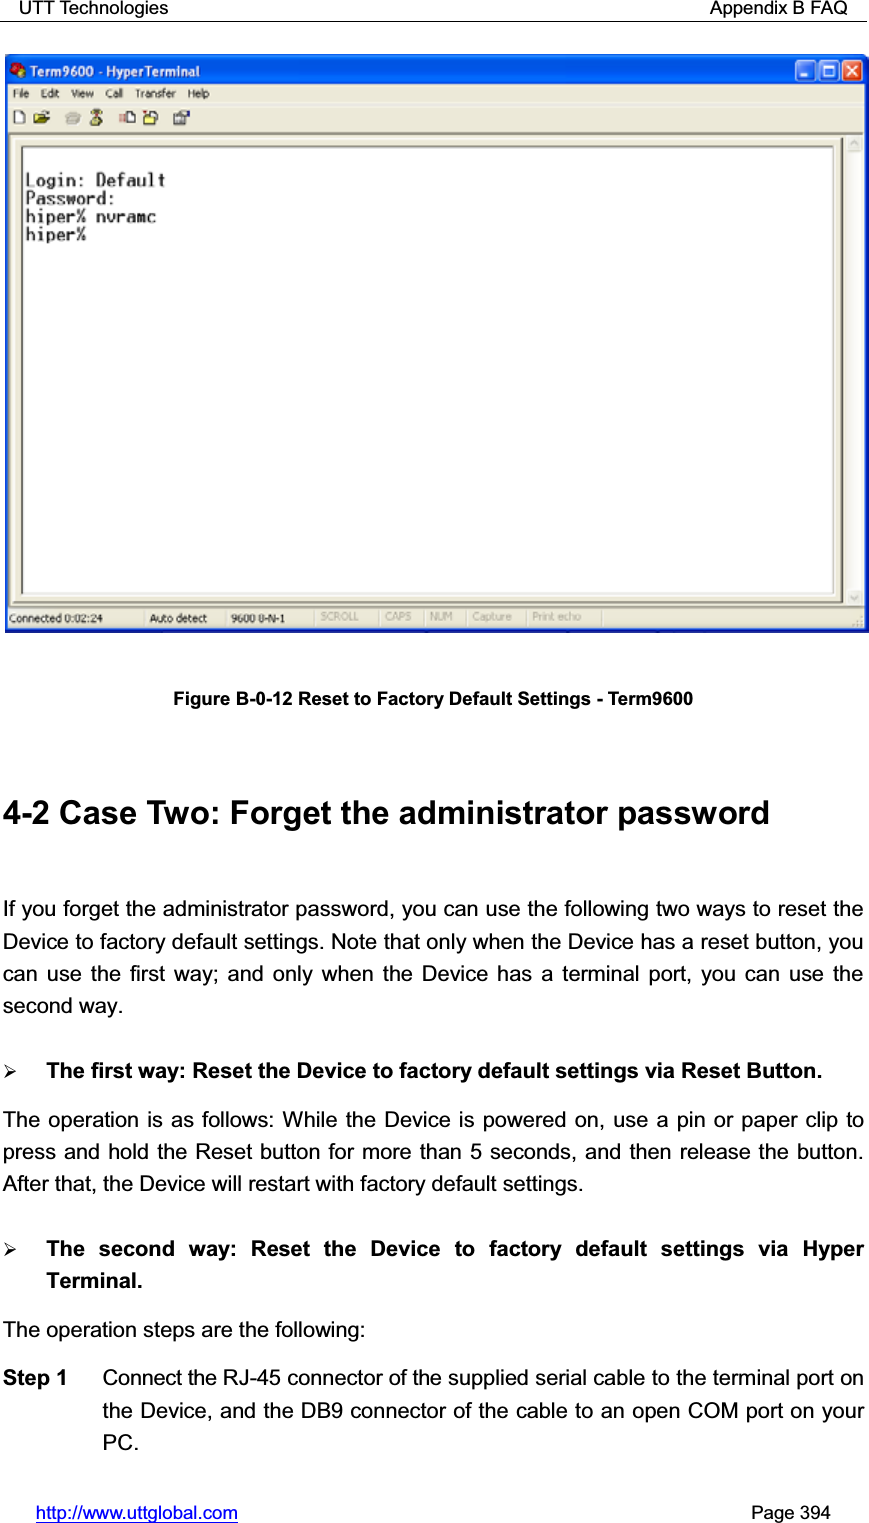 UTT Technologies                                                          Appendix B FAQ http://www.uttglobal.com                                                       Page 394 Figure B-0-12 Reset to Factory Default Settings - Term9600 4-2 Case Two: Forget the administrator password If you forget the administrator password, you can use the following two ways to reset the Device to factory default settings. Note that only when the Device has a reset button, you can use the first way; and only when the Device has a terminal port, you can use the second way.   ¾The first way: Reset the Device to factory default settings via Reset Button. The operation is as follows: While the Device is powered on, use a pin or paper clip to press and hold the Reset button for more than 5 seconds, and then release the button. After that, the Device will restart with factory default settings. ¾The second way: Reset the Device to factory default settings via Hyper Terminal. The operation steps are the following:   Step 1  Connect the RJ-45 connector of the supplied serial cable to the terminal port on the Device, and the DB9 connector of the cable to an open COM port on your PC. 